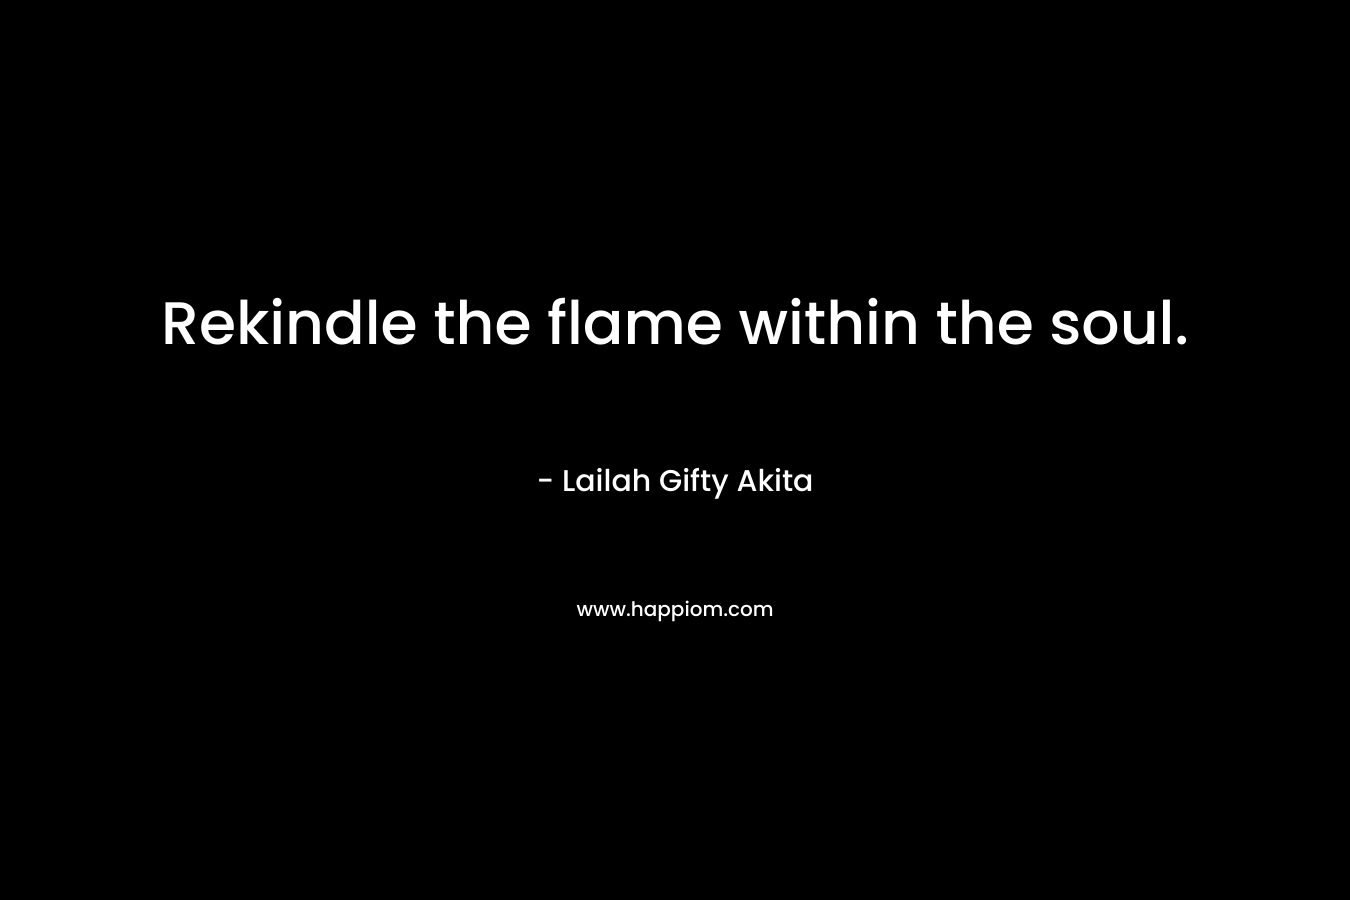 Rekindle the flame within the soul. – Lailah Gifty Akita